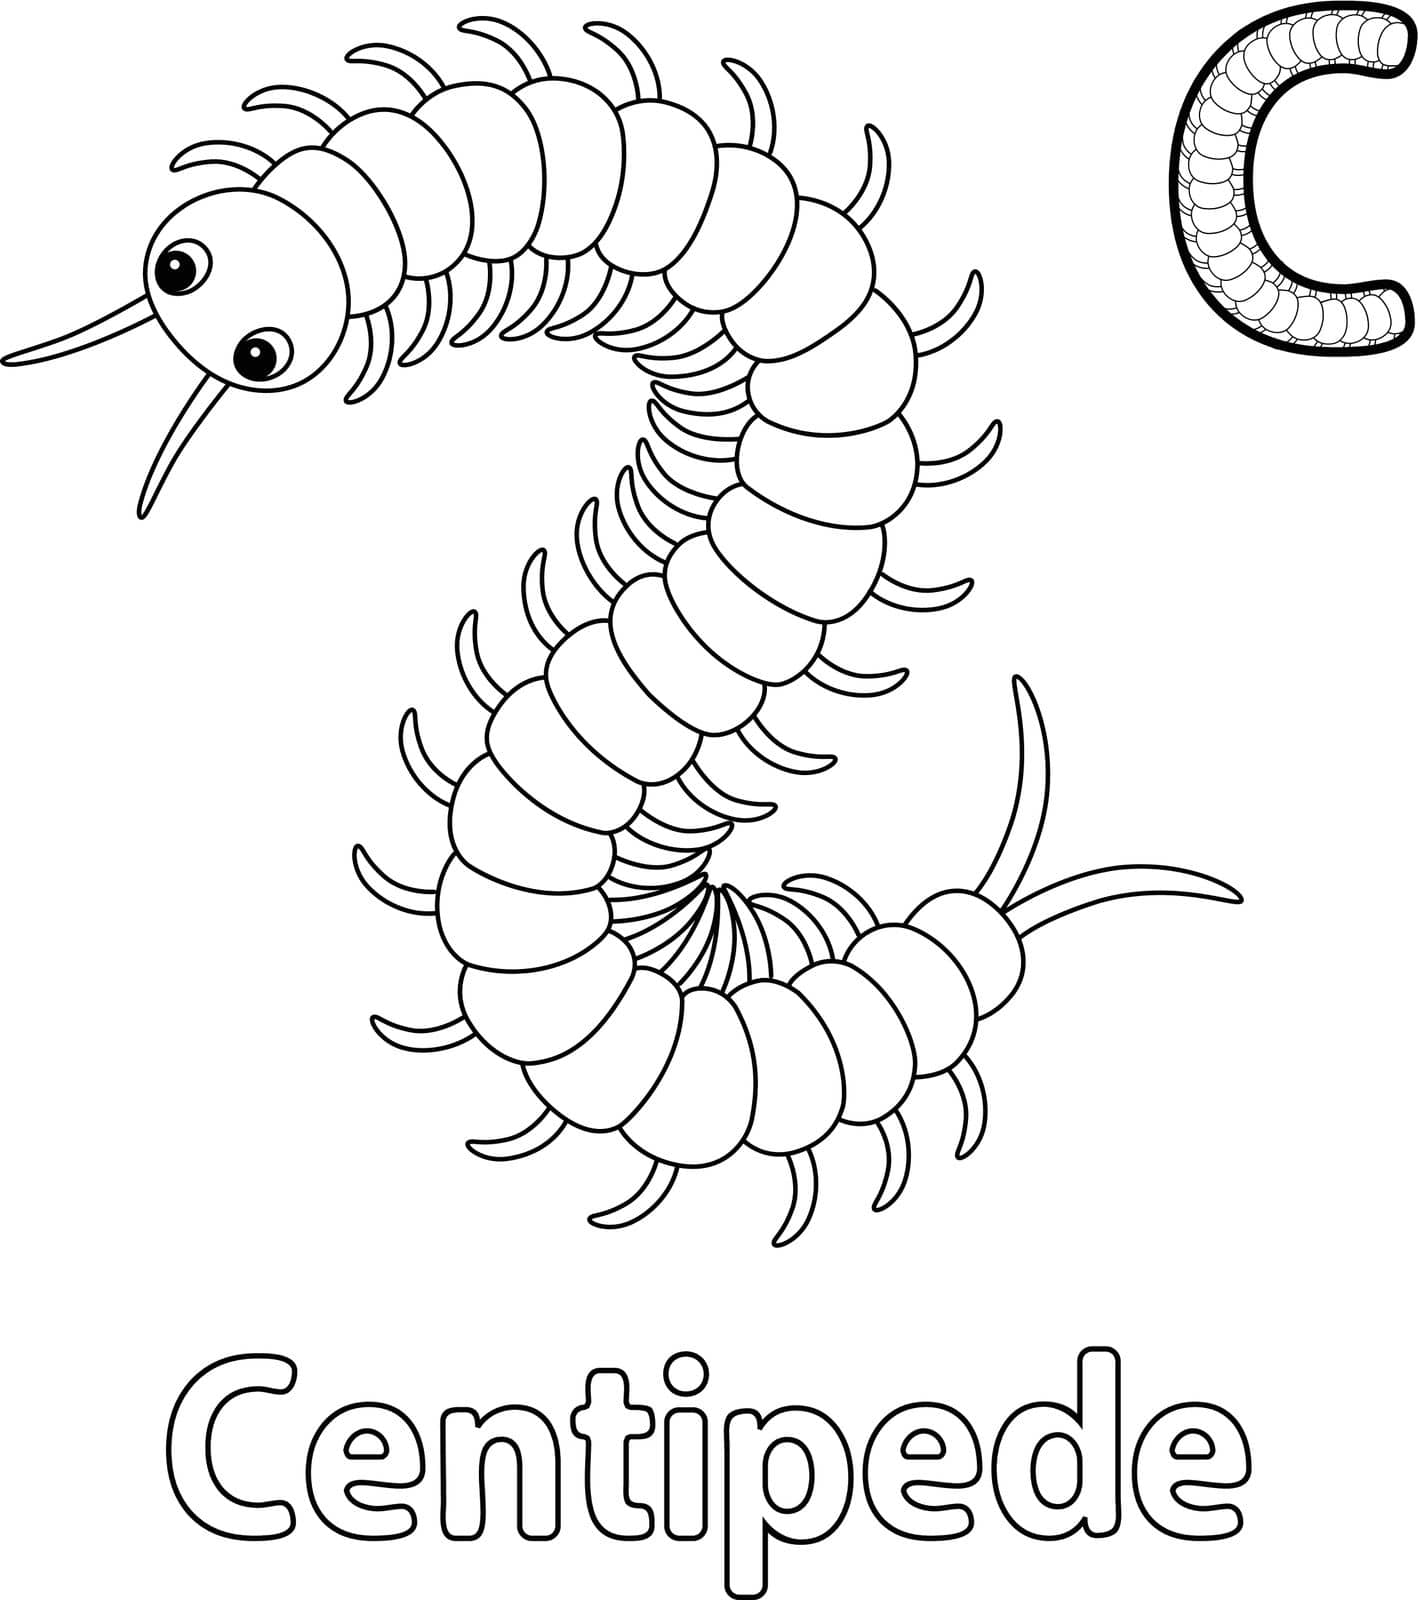 Centipede Animal Alphabet ABC Isolated Coloring C by abbydesign